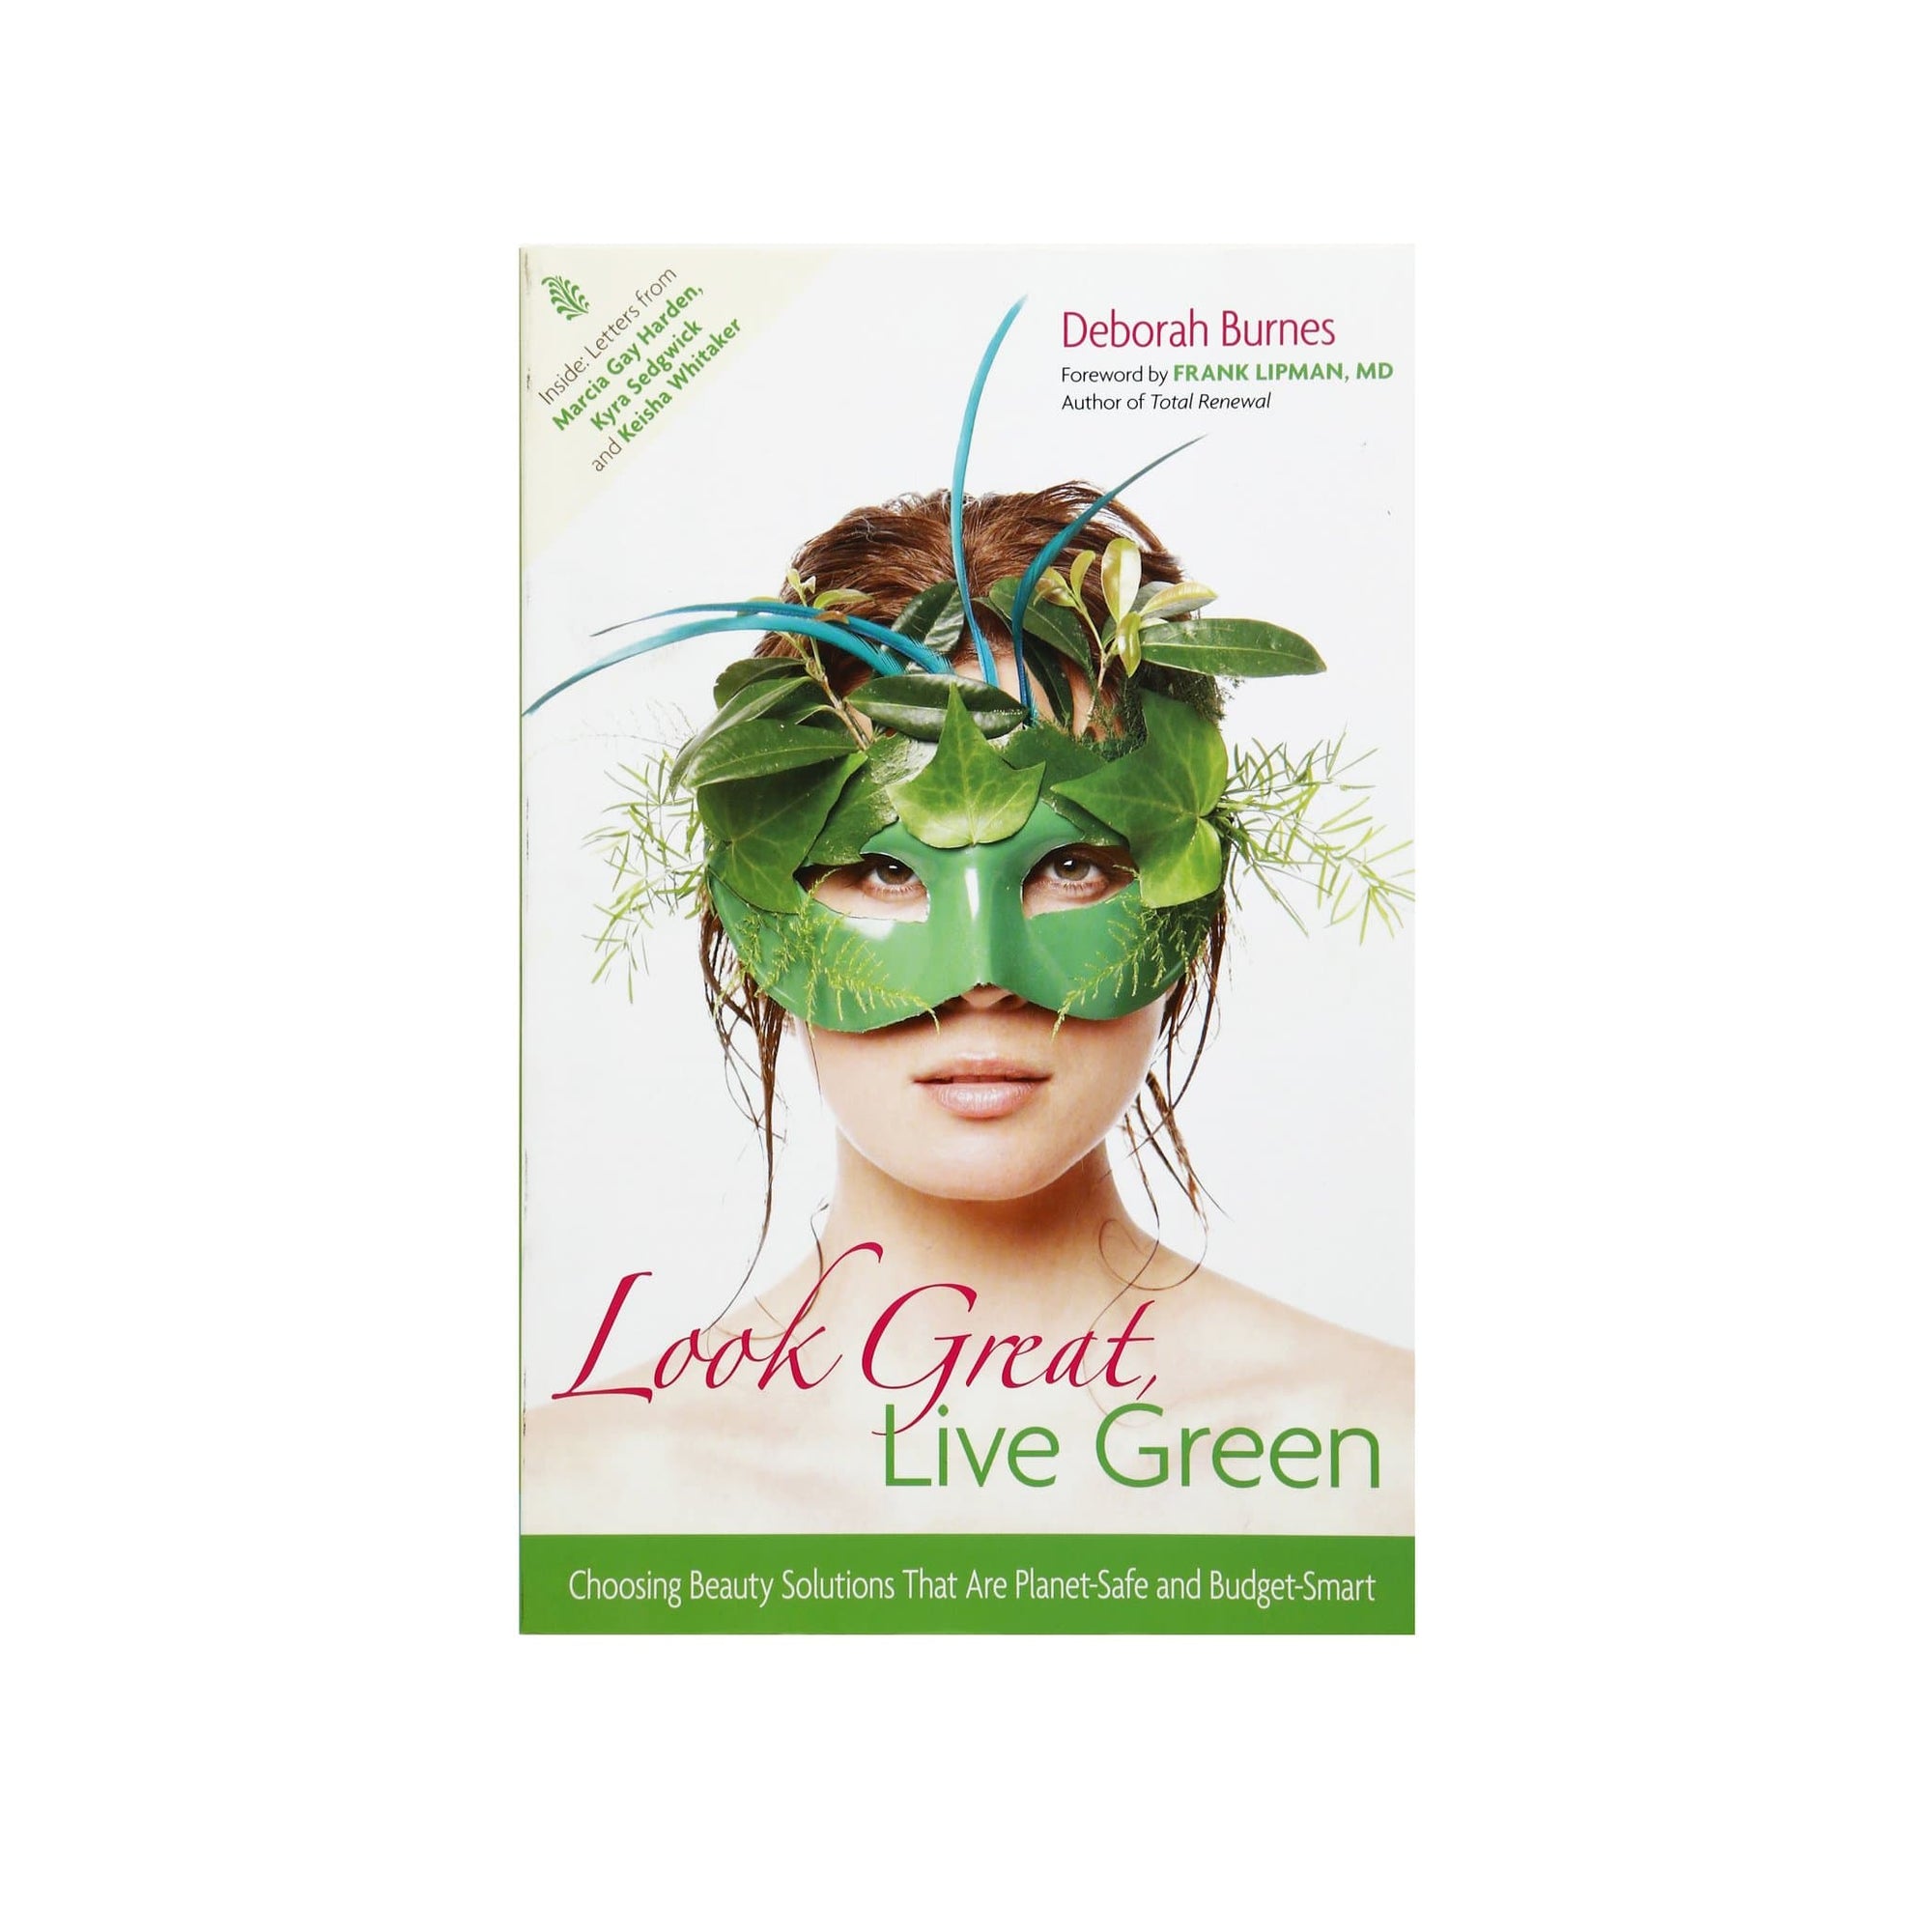 Look Great, Live Green